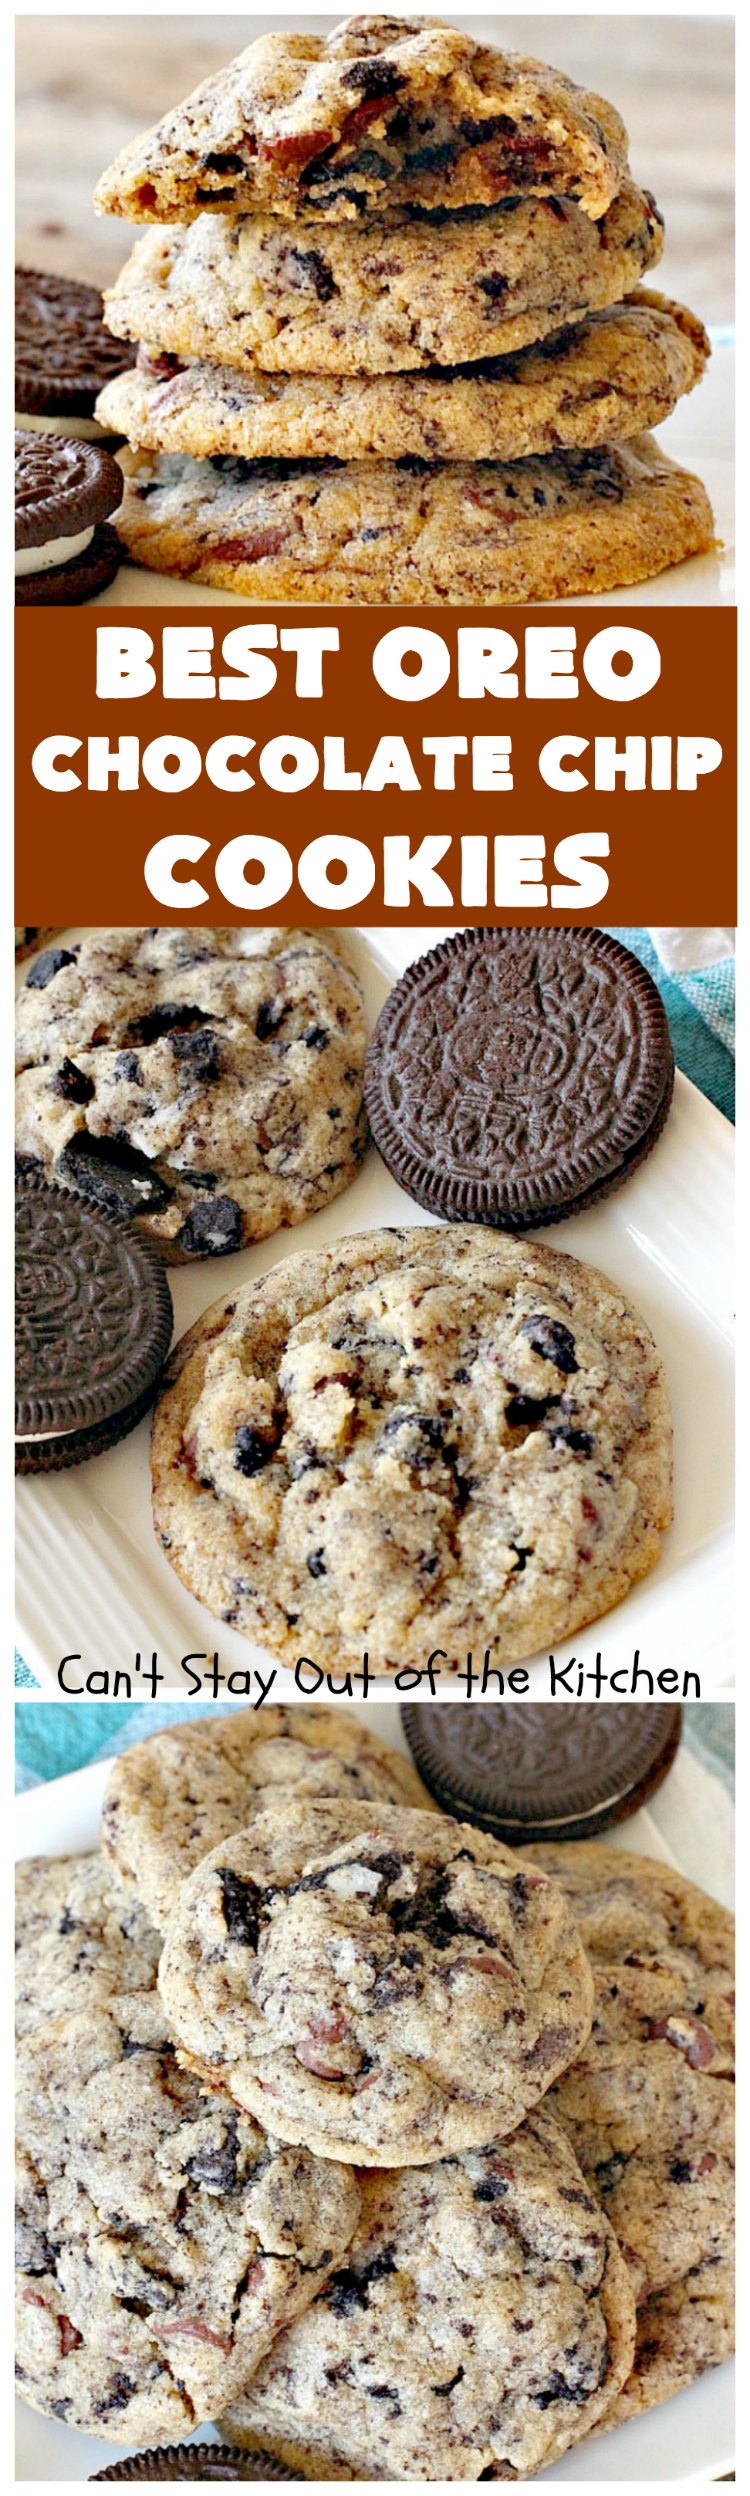 Best Oreo Chocolate Chip Cookies | Can't Stay Out of the Kitchen